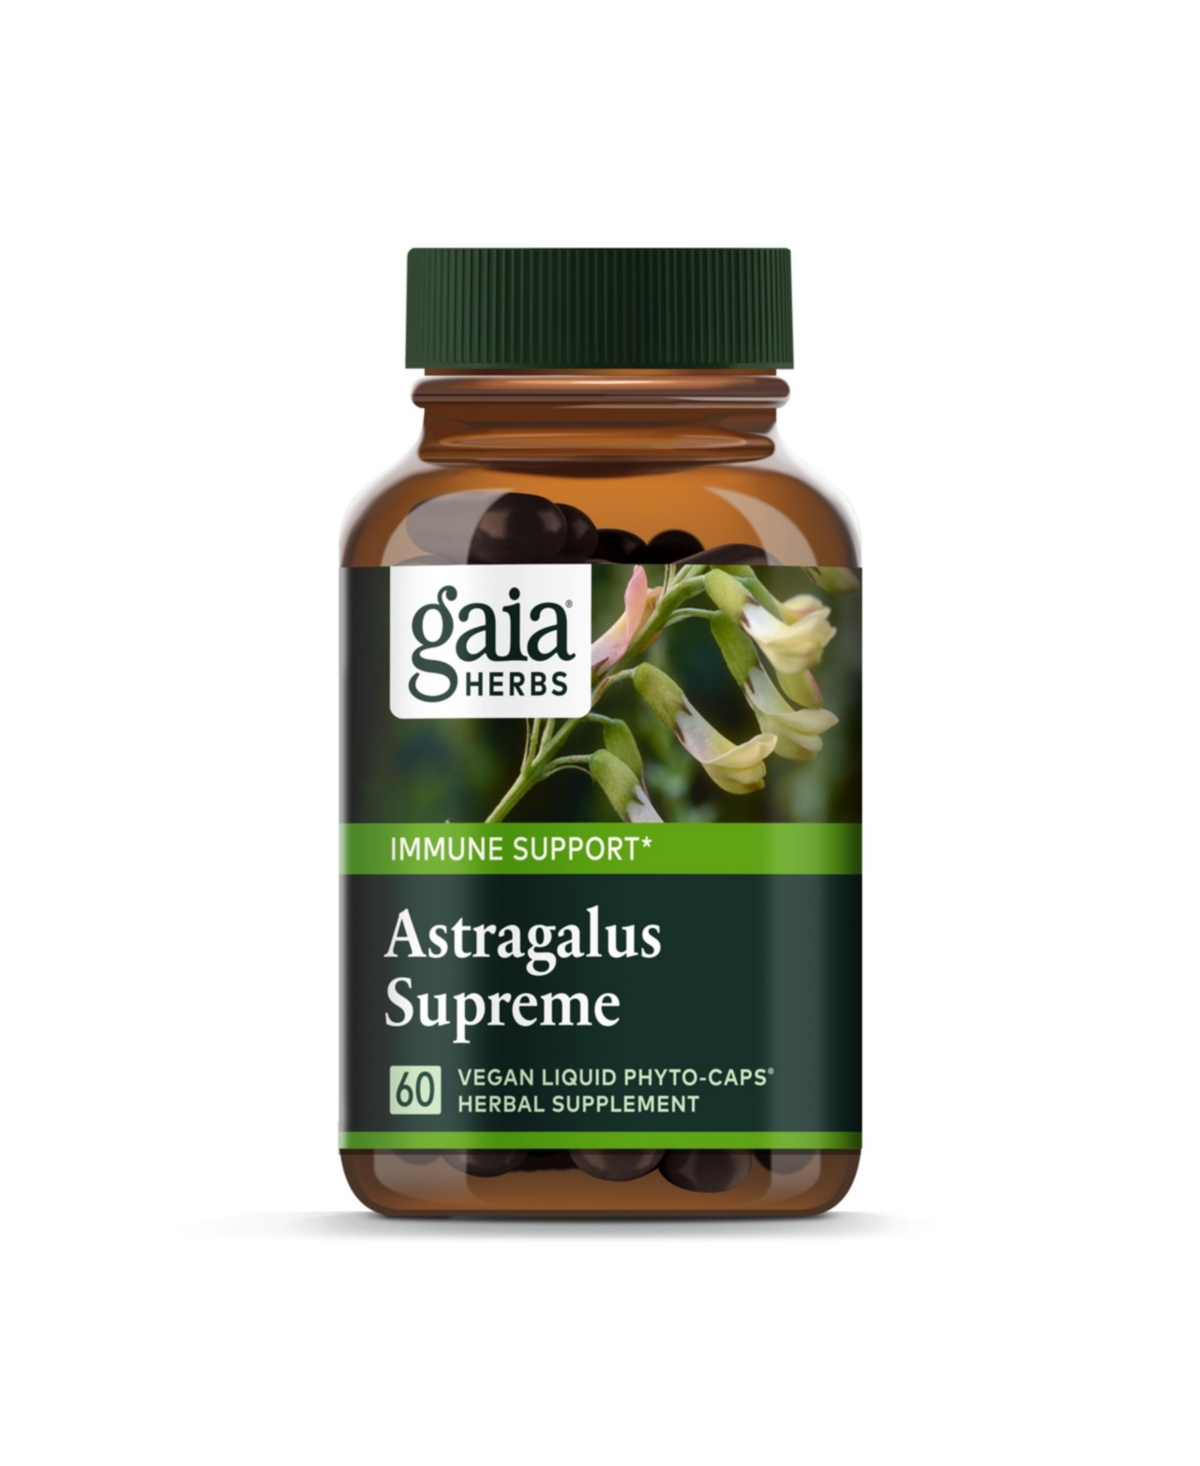 Astragalus Supreme - Immune and Antioxidant Support Herbal Supplement - With Astragalus Root, Schisandra Berry, and Ligustrum - 60 Liquid P